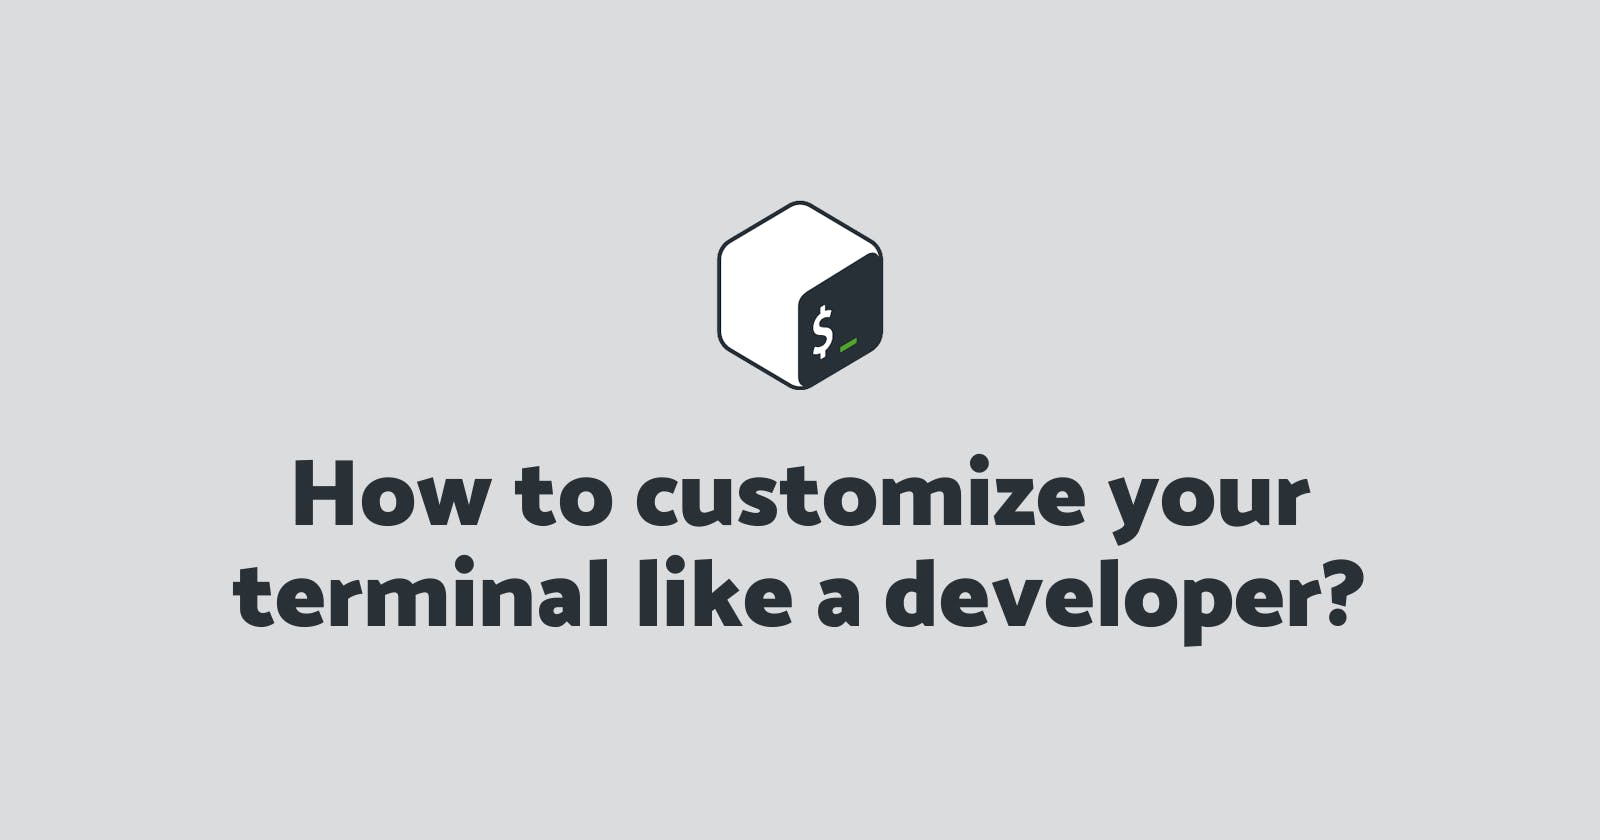 How to customize your terminal like a developer?